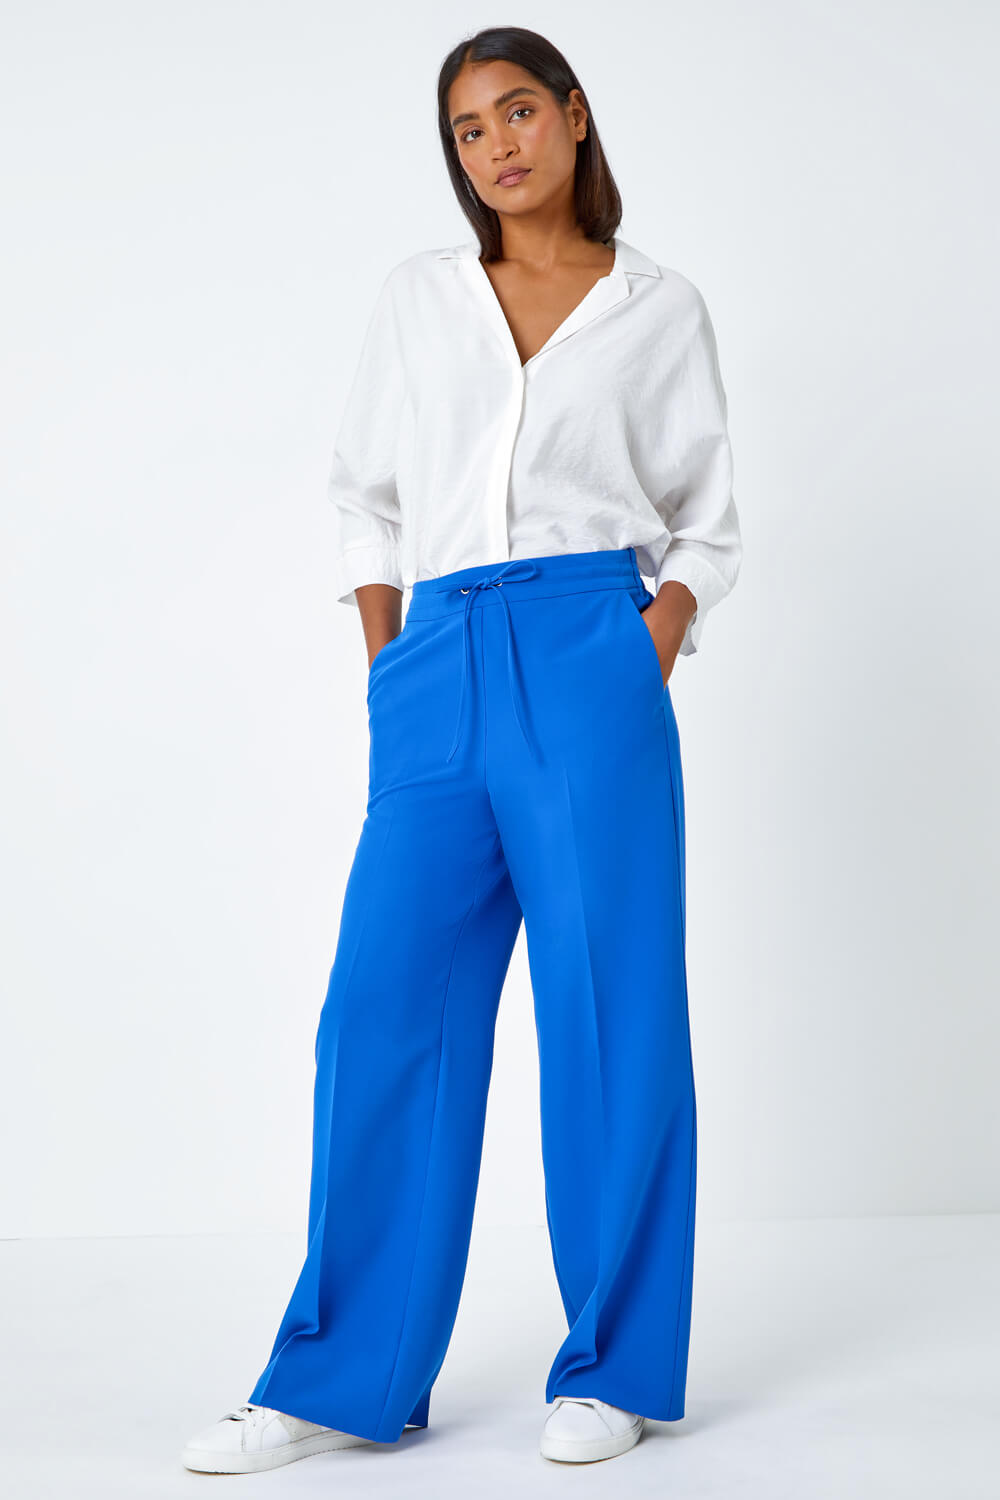 Royal Blue Wide Leg Tie Front Stretch Trouser, Image 2 of 5